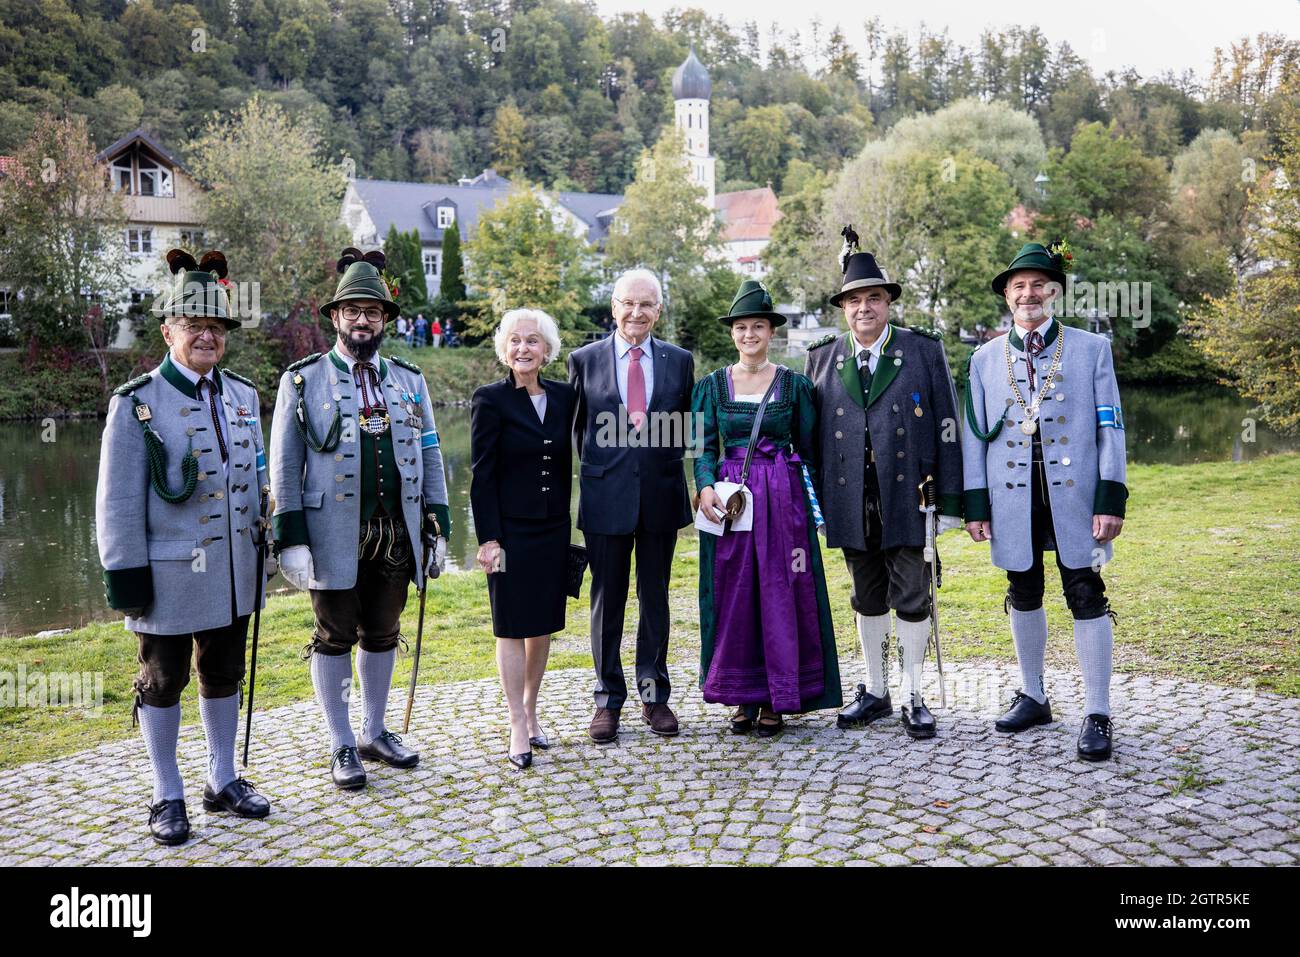 02 October 2021, Bavaria, Wolfratshausen: Edmund Stoiber, former CSU chairman (M), and his wife Karin (3rd from left) stand in the middle of Ewald Brückl, honorary captain of the Gebirgsschützen Wolfratshausen (l-r), Rainer Lorz, captain of the Gebirgsschützen Wolfratshausen (l-r), during a tribute at the 80th birthday celebration of the ex-CSU party leader. Birthday of the ex-CSU party leader in the middle of Ewald Brückl, honorary captain of the mountain riflemen Wolfratshausen (l-r), Rainer Lorz, captain of the mountain riflemen Wolfratshausen, Lena Hochstraßer, sutler of the mountain rifle Stock Photo